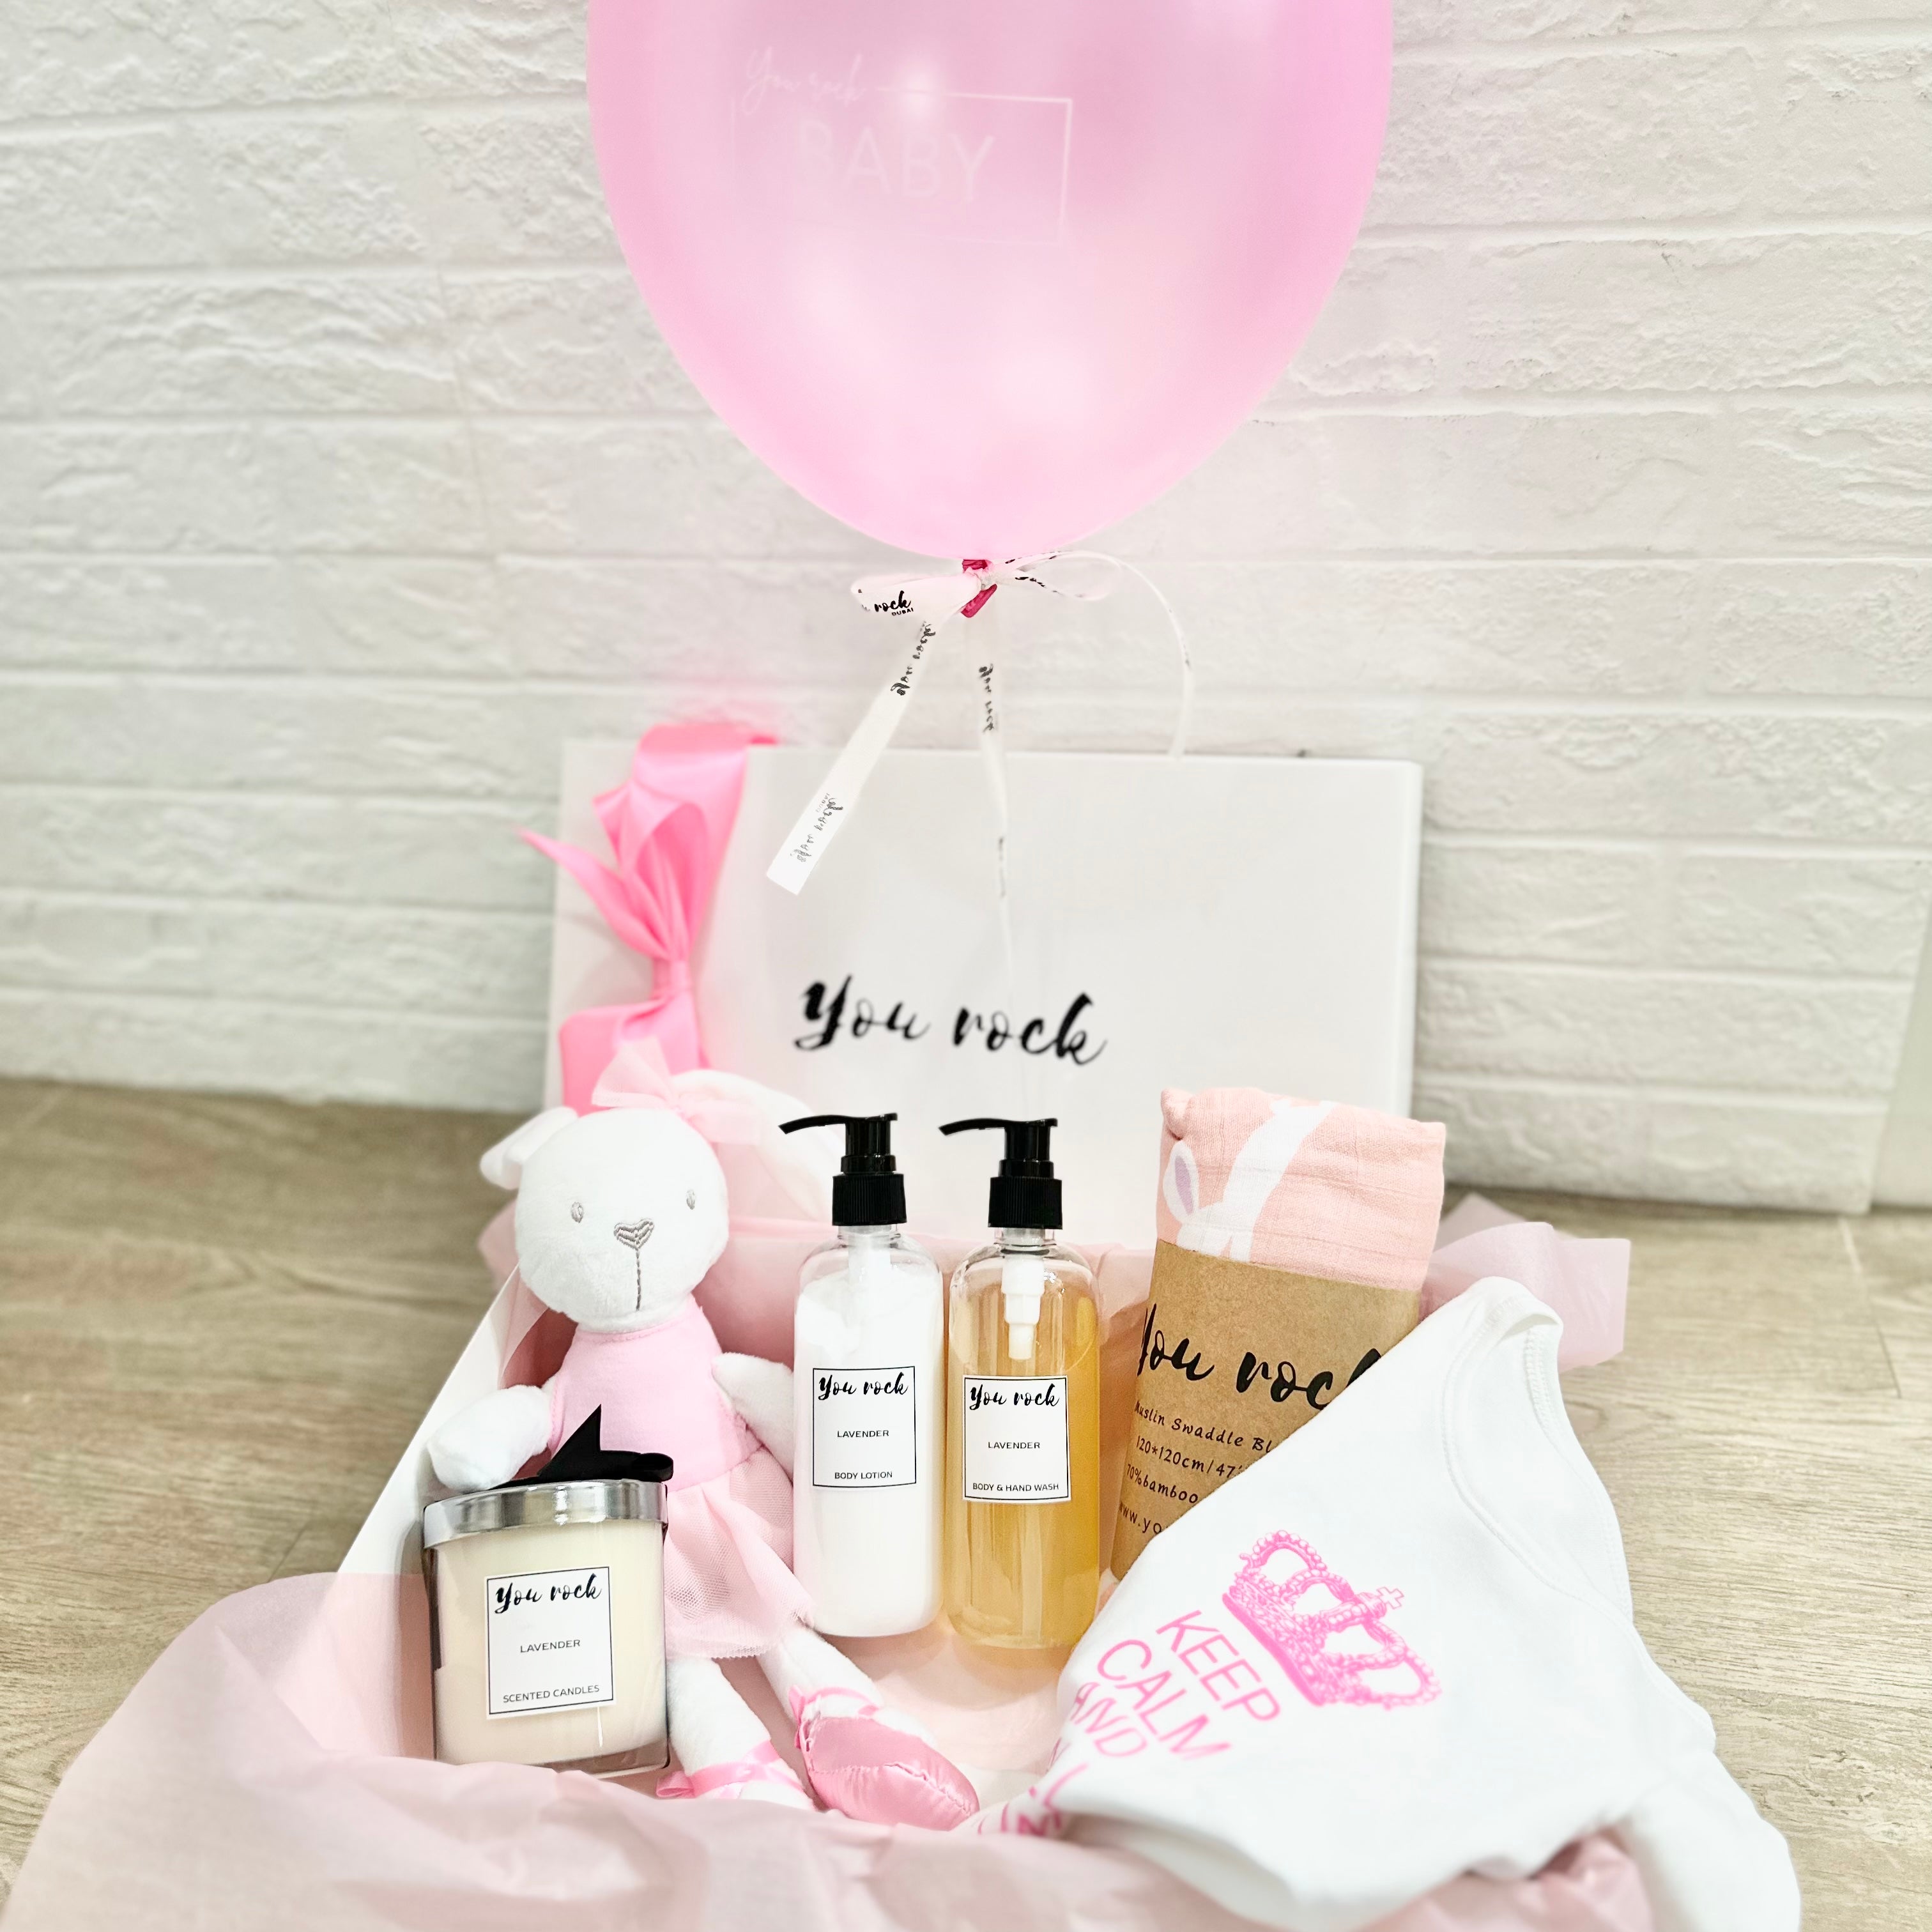 "Keep Calm" Mommy and Baby Girl Gift Box